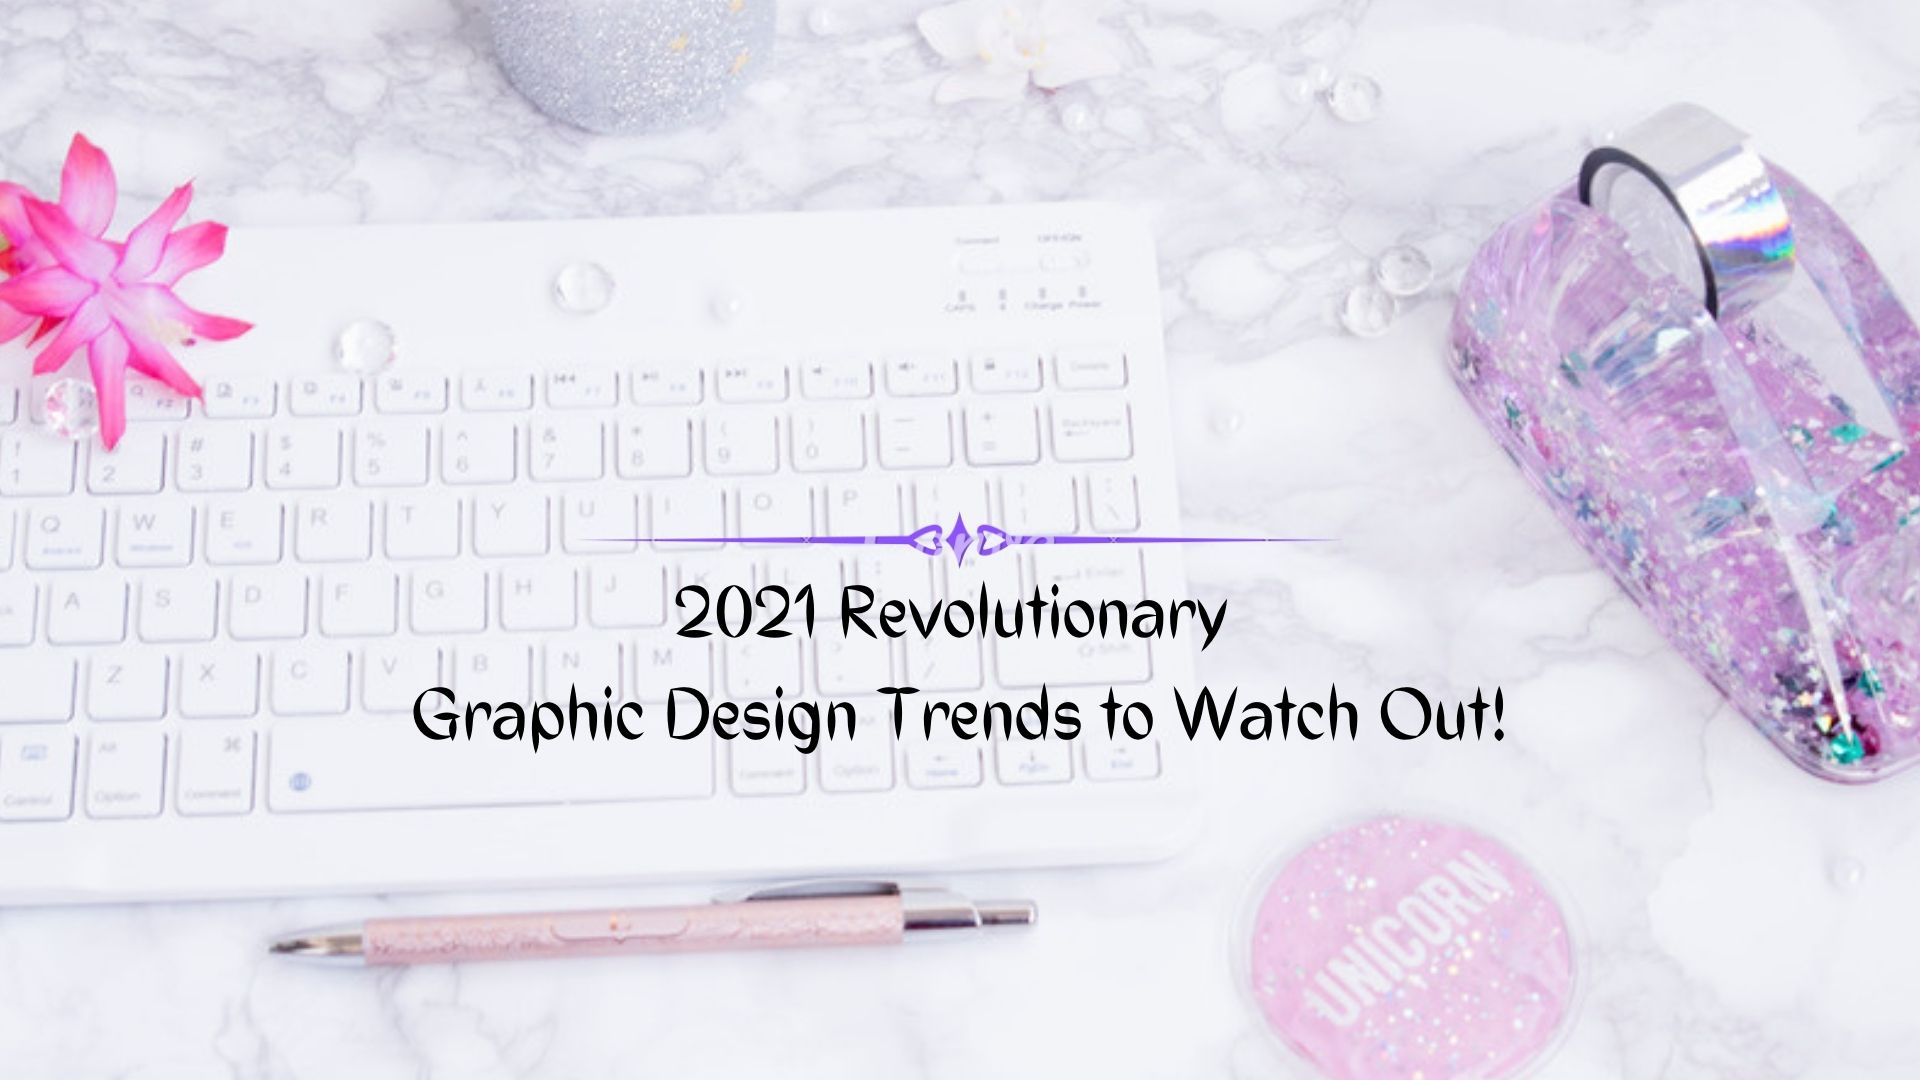 Graphic Design Trends in the 21st Century You Should Be Aware Of